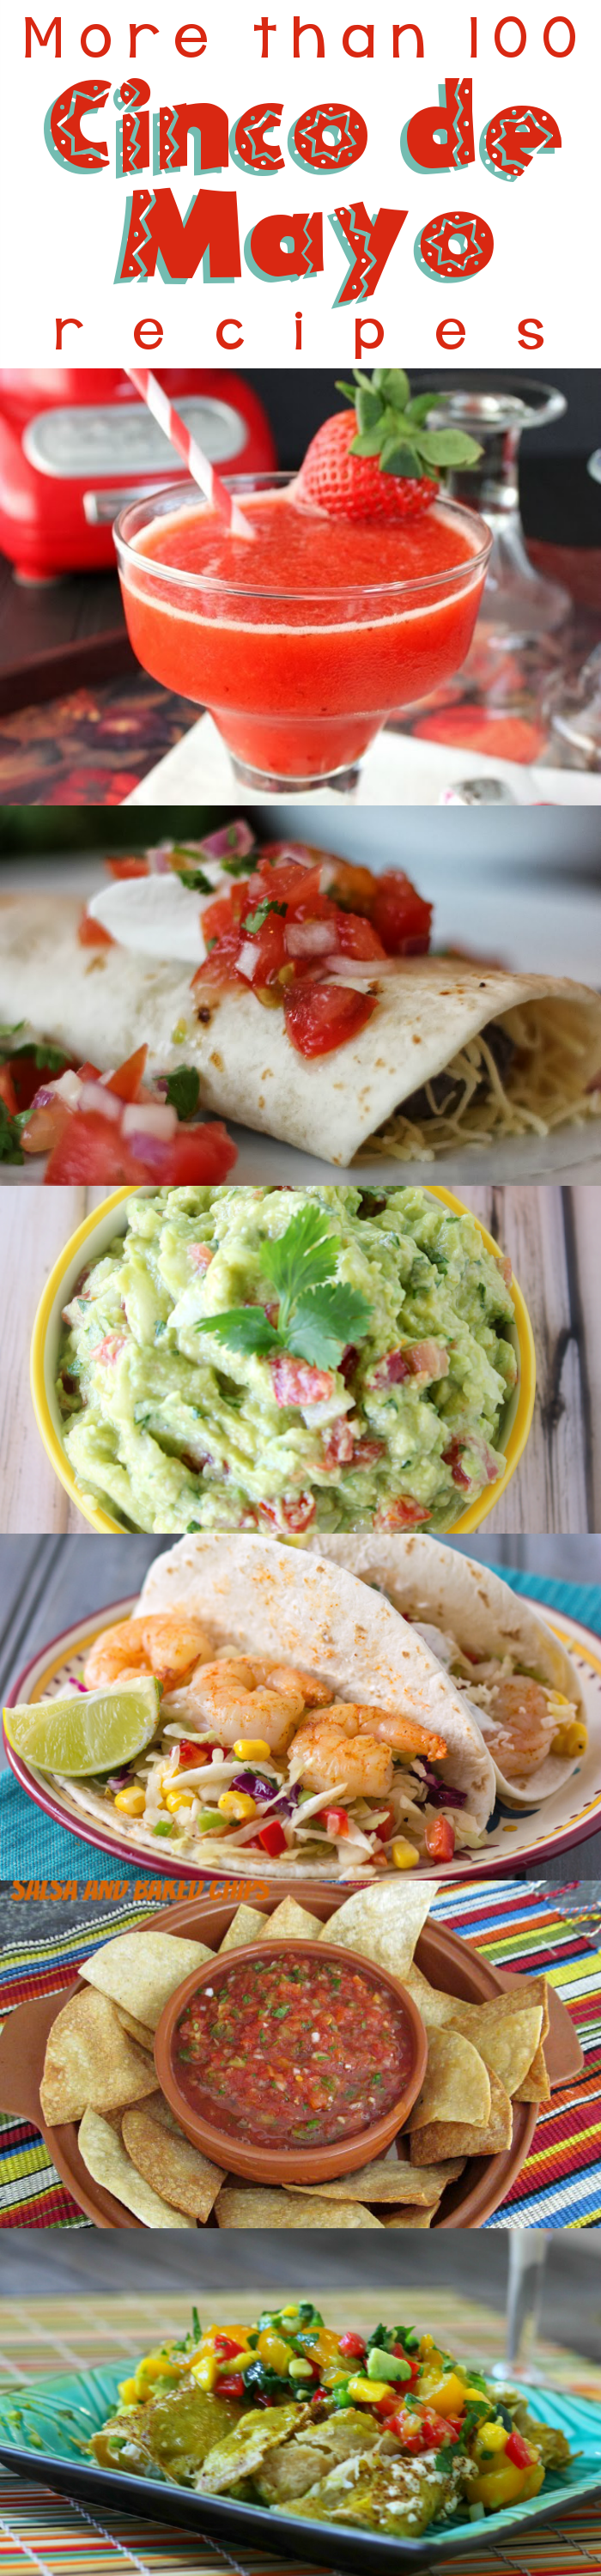 Cinco de Mayo Round-Up - More than 100 Mexican/Tex-Mex recipes from your favorite food bloggers! #CincoDeMayo #Mexican #roundup